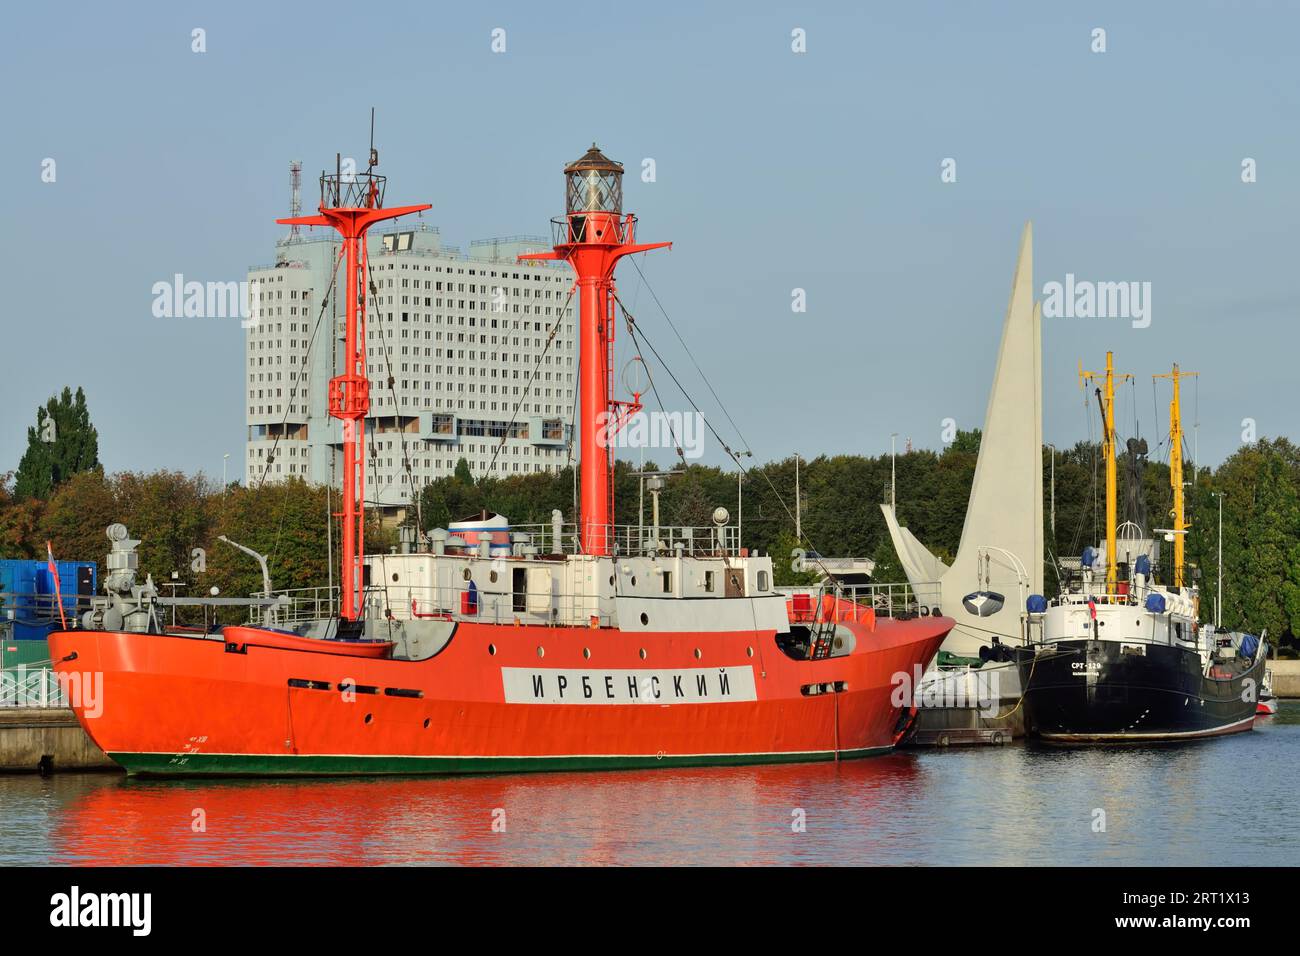 Kaliningrad, Russia, September 30, 2020: ship floating lighthouse Irbensky stands on the roadstead of the world ocean Museum, Peter the Great Stock Photo